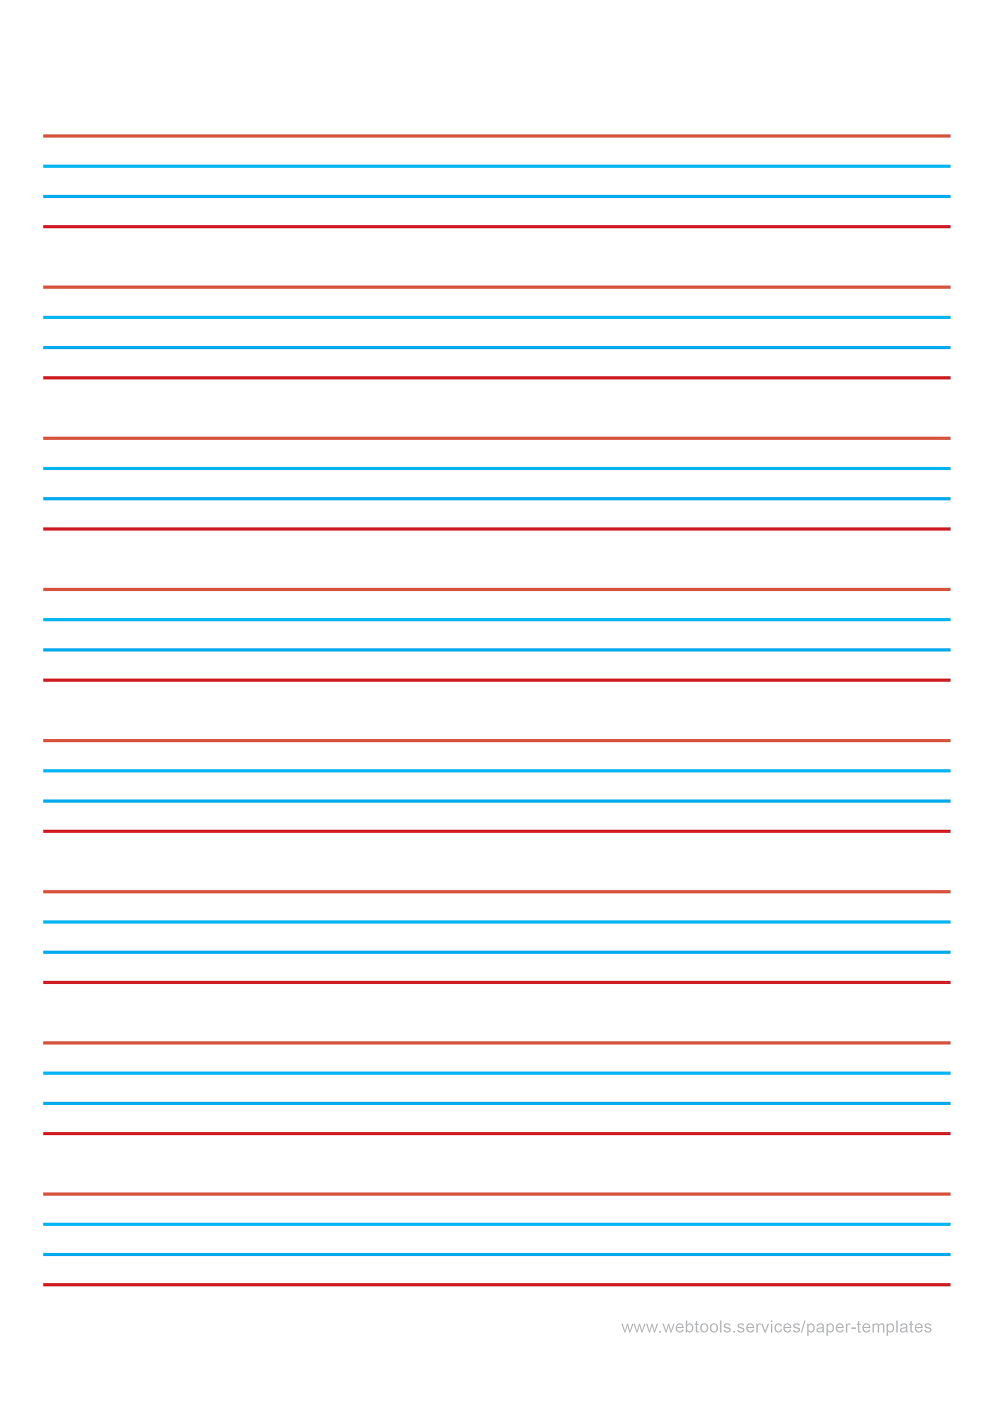 Webtools - Wide Four Lines English Alphabet Writing Paper Template Within Ruled Paper Word Template